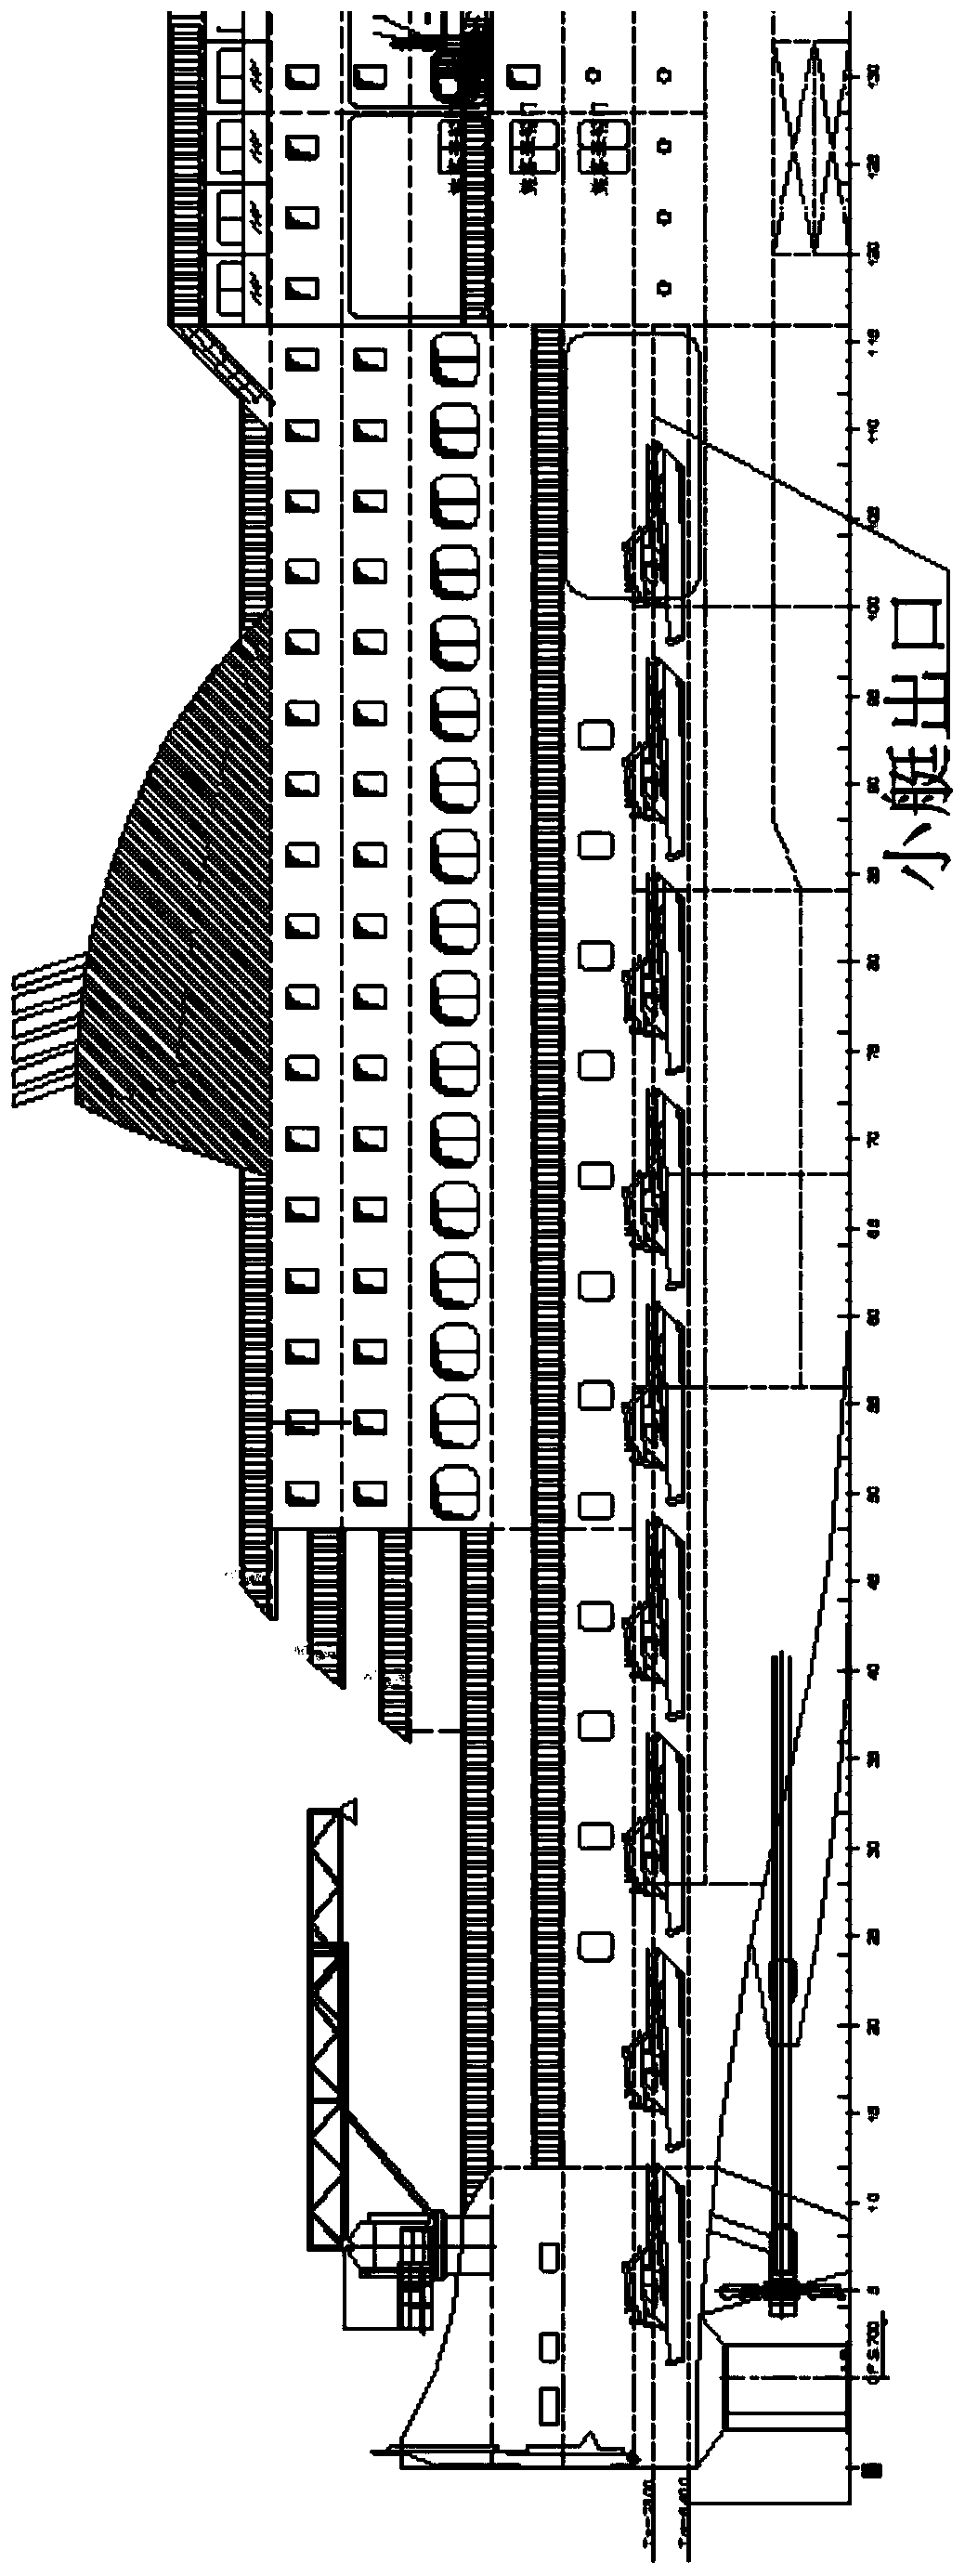 Docking method between passenger ship and small boat and method of boarding and disembarking